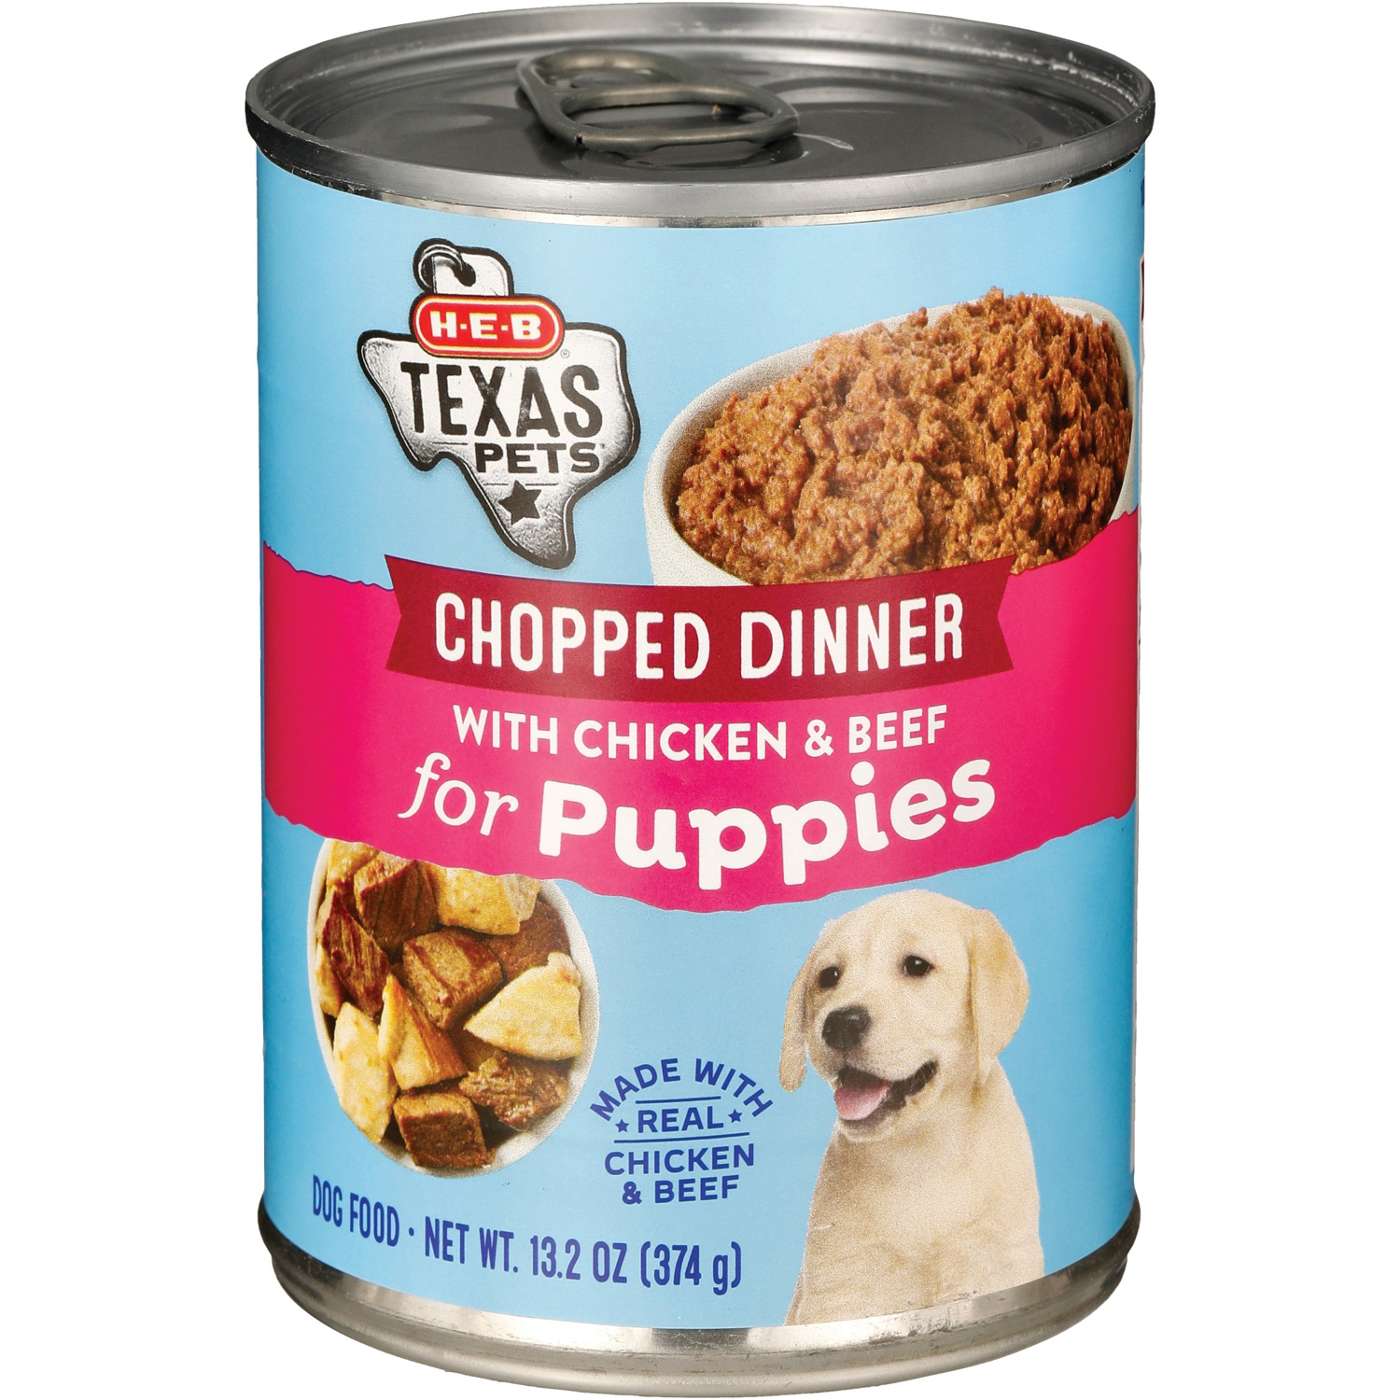 H-E-B Texas Pets Chopped Chicken & Beef Wet Puppy Food; image 2 of 2